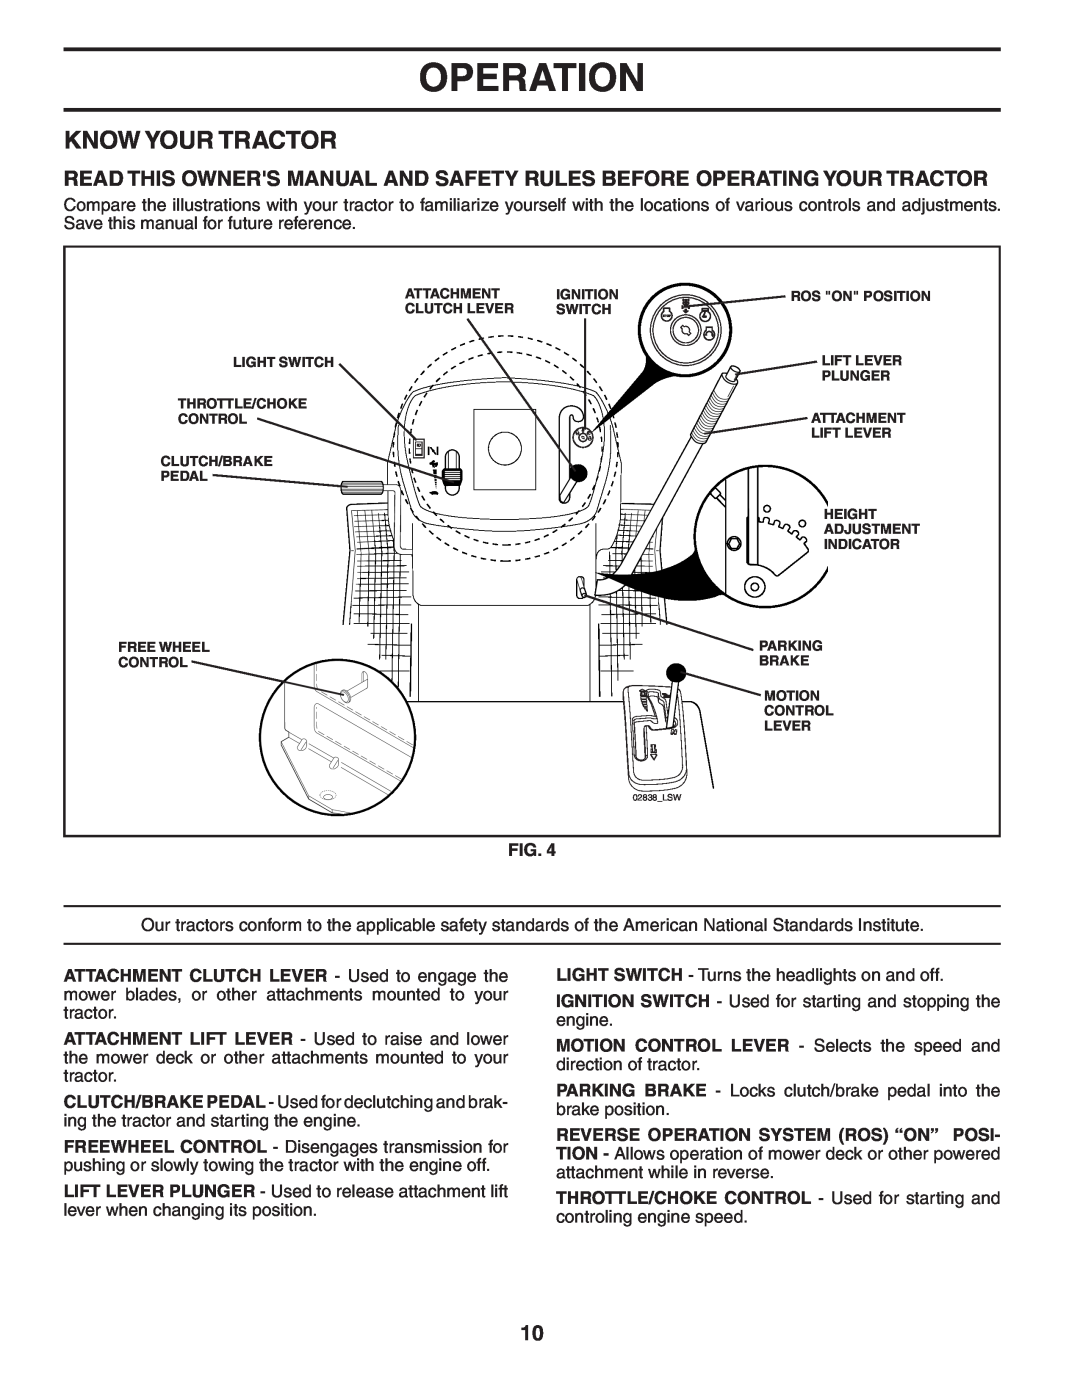 Poulan 405327 manual Know Your Tractor, Operation 